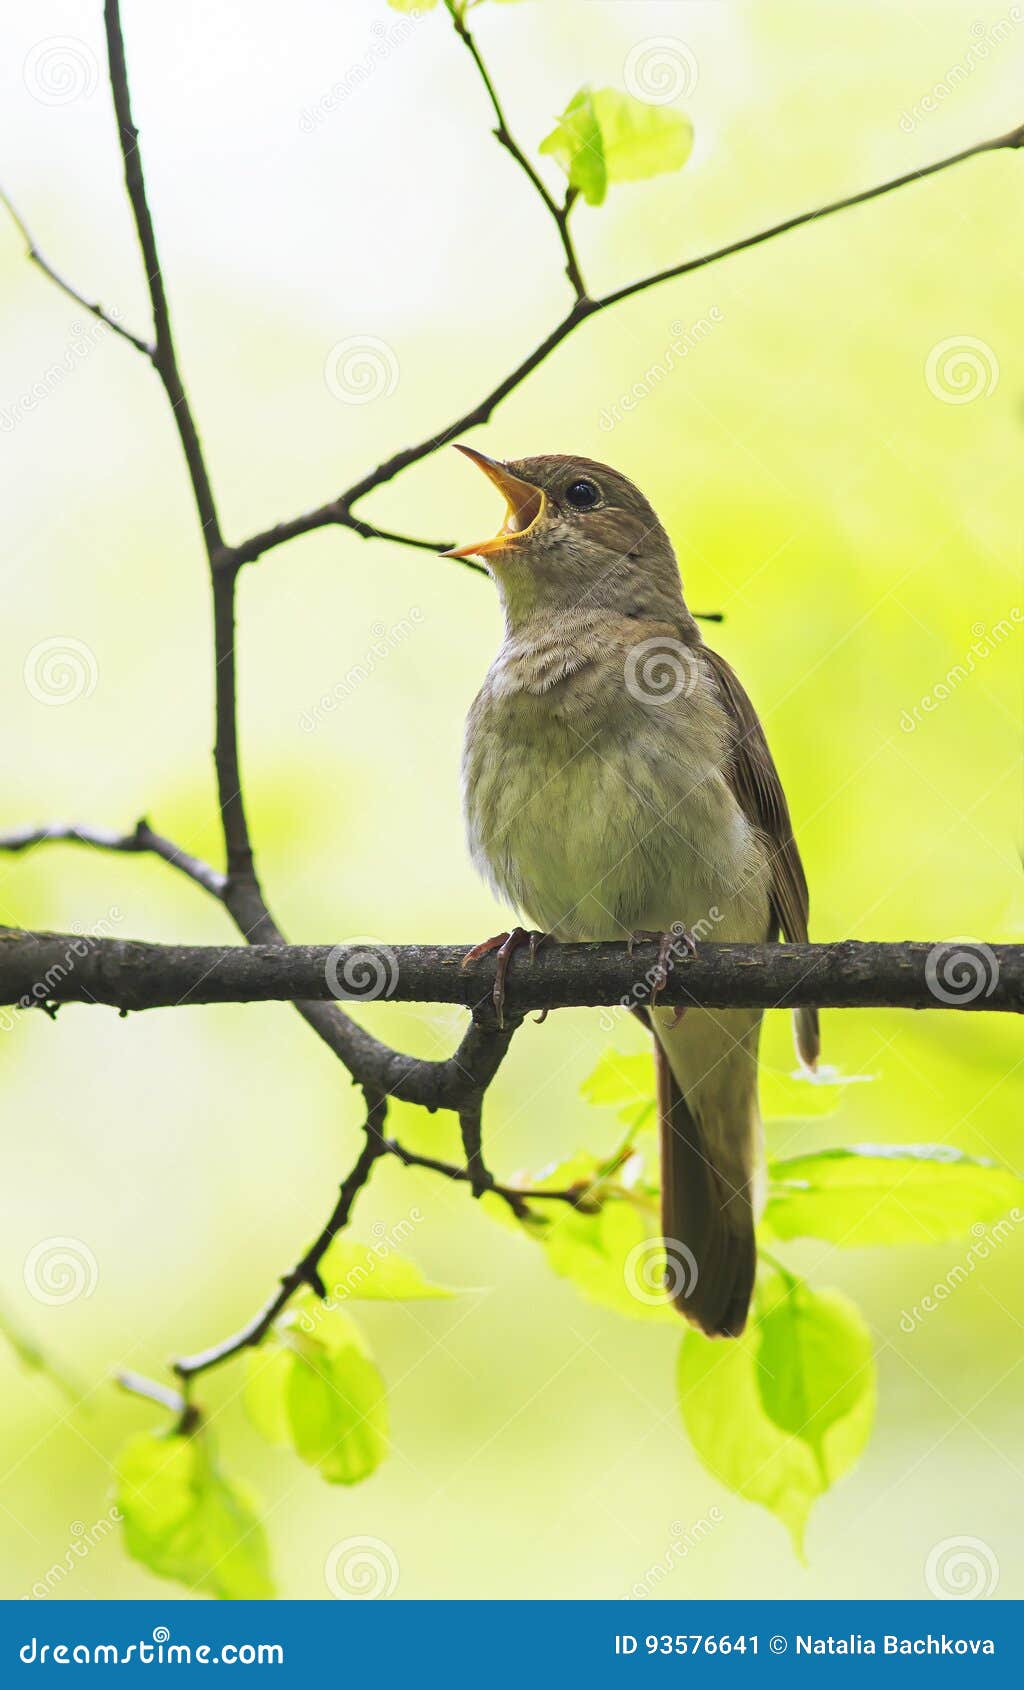 bird nightingale sing loudly in spring forest